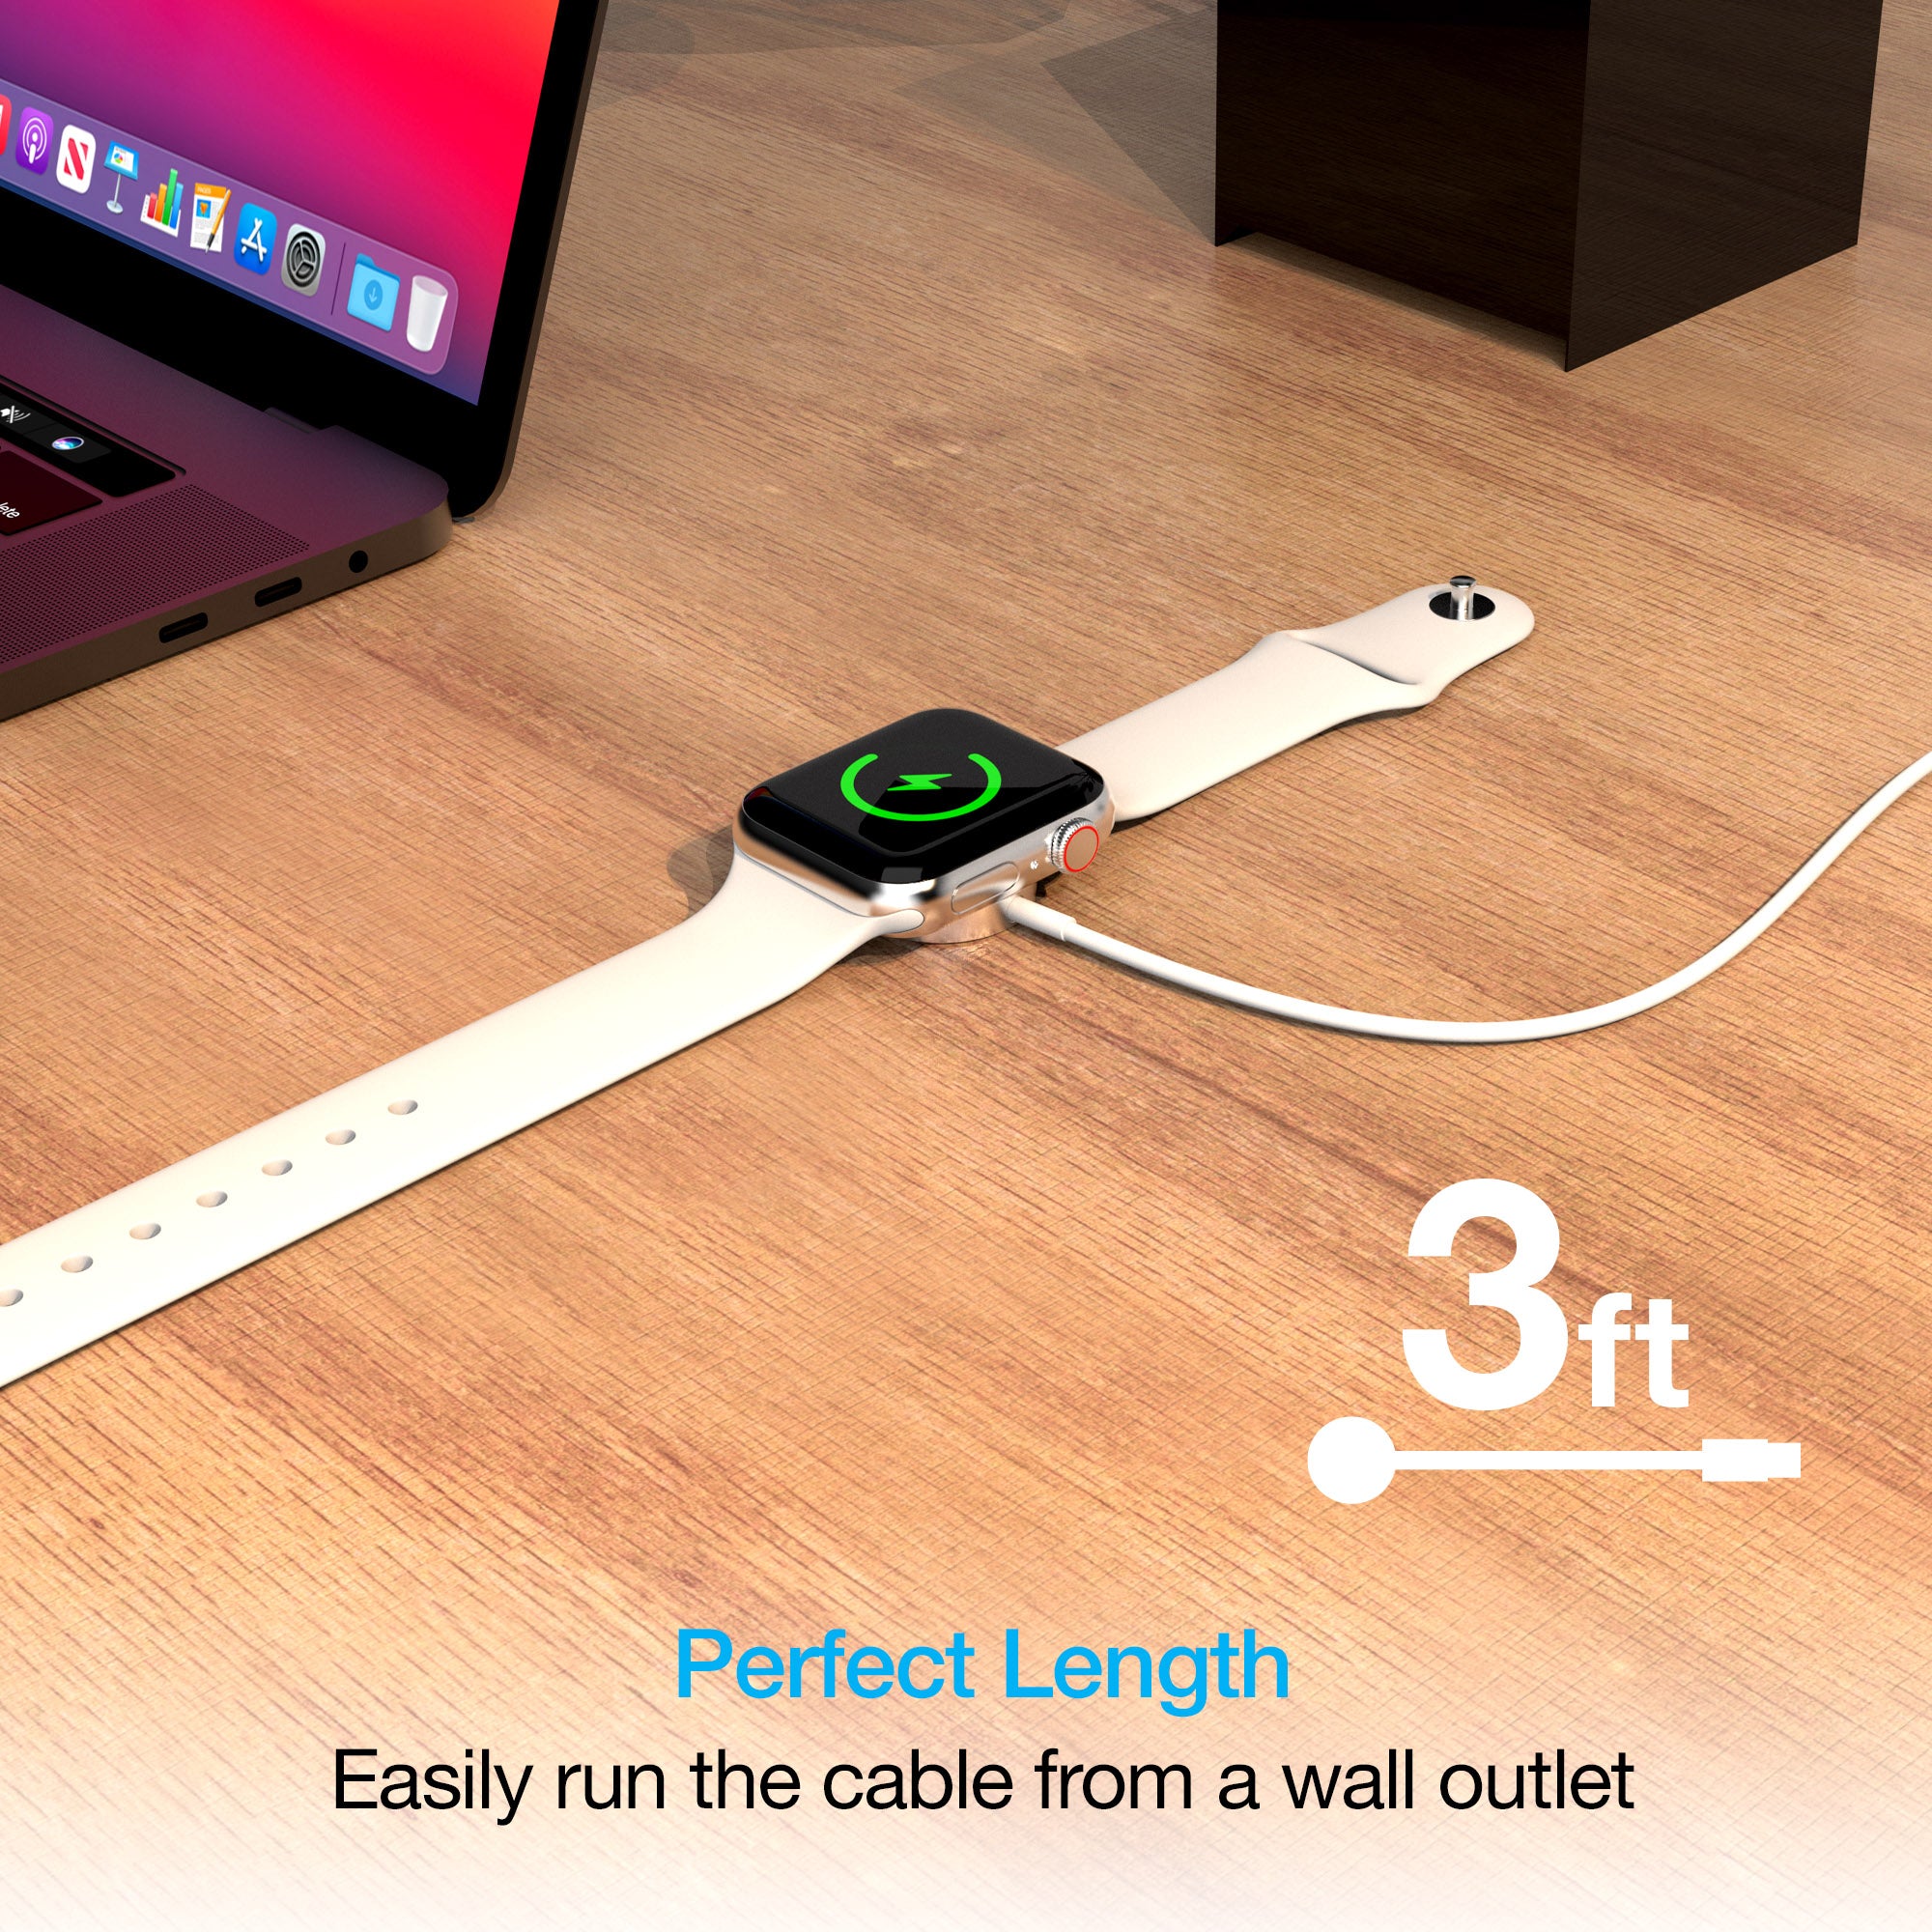 How to Charge Your Apple Watch